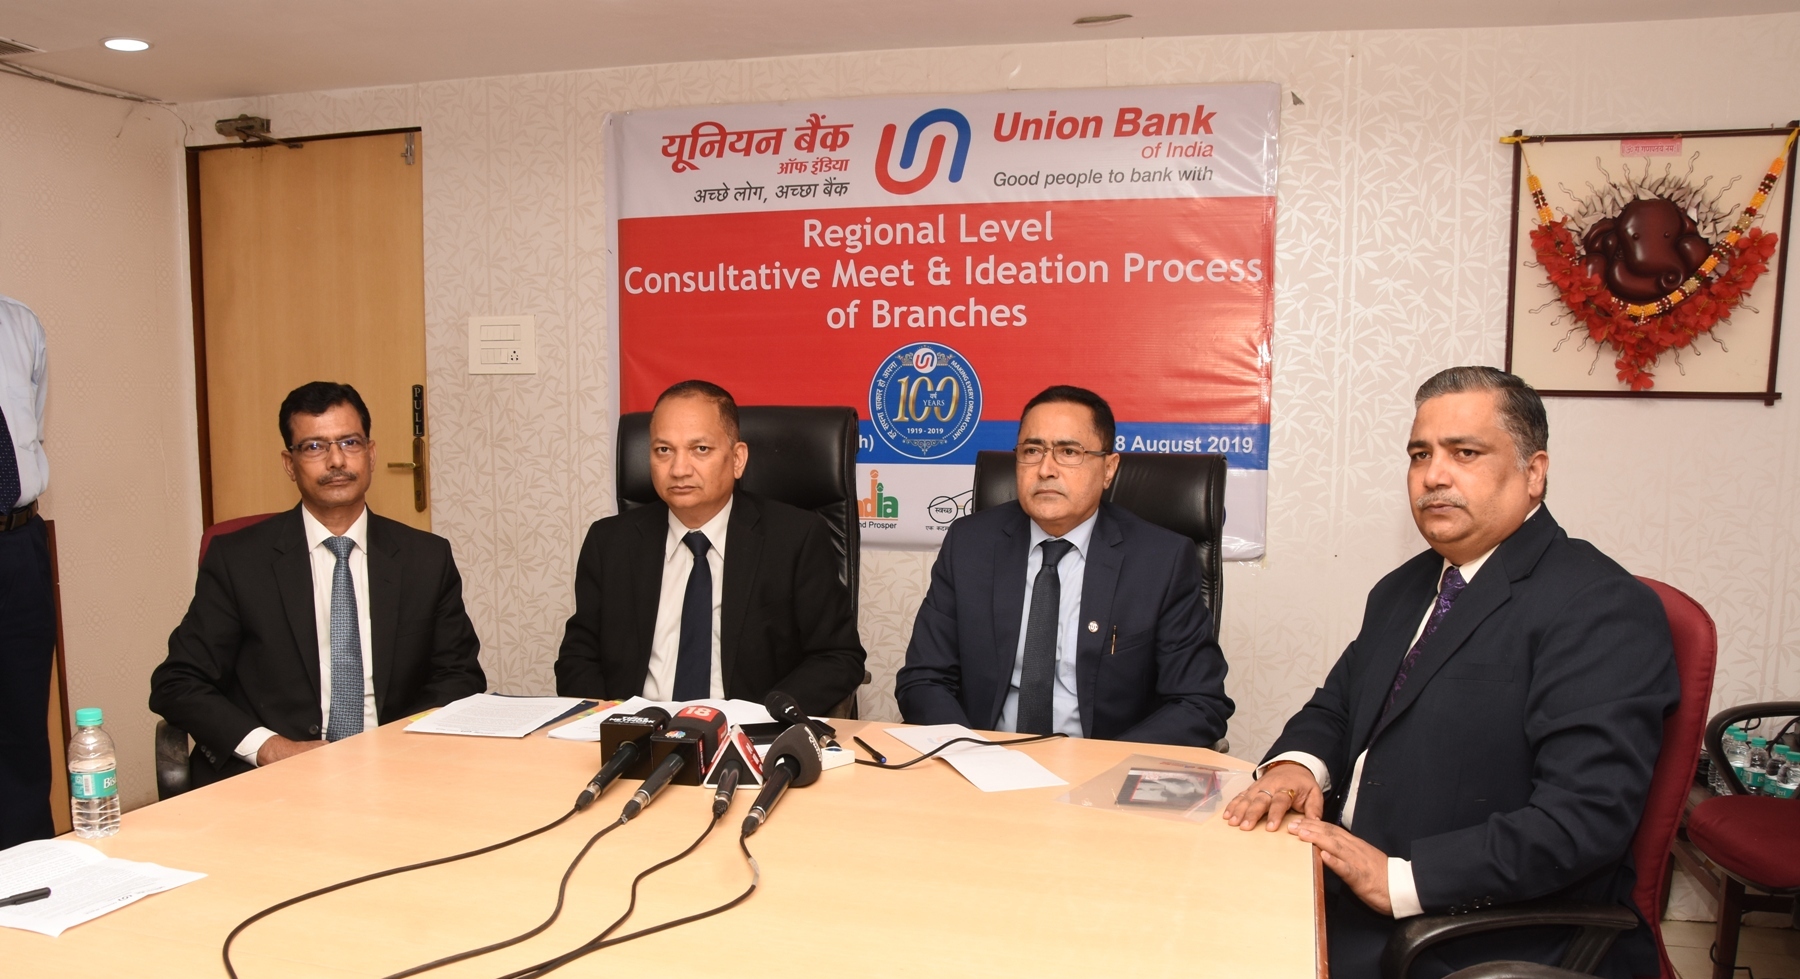 Mr. Gopal Singh Gusain, ED, Union Bank of India, (second from left) along with (L to R) Mr. AK Das (Dy Zonal Head), Mr. Brajeshwar Sharma (GM-HR, Union Bank of India) and Mr. Rajiv Mishra (Regional Head-Mumbai South, Union Bank of India) at the Consultative Meet & Ideation Process of Branches of Union Bank of India in Mumbai on 17th August 2019 - Photo By Sachin Murdeshwar GPN